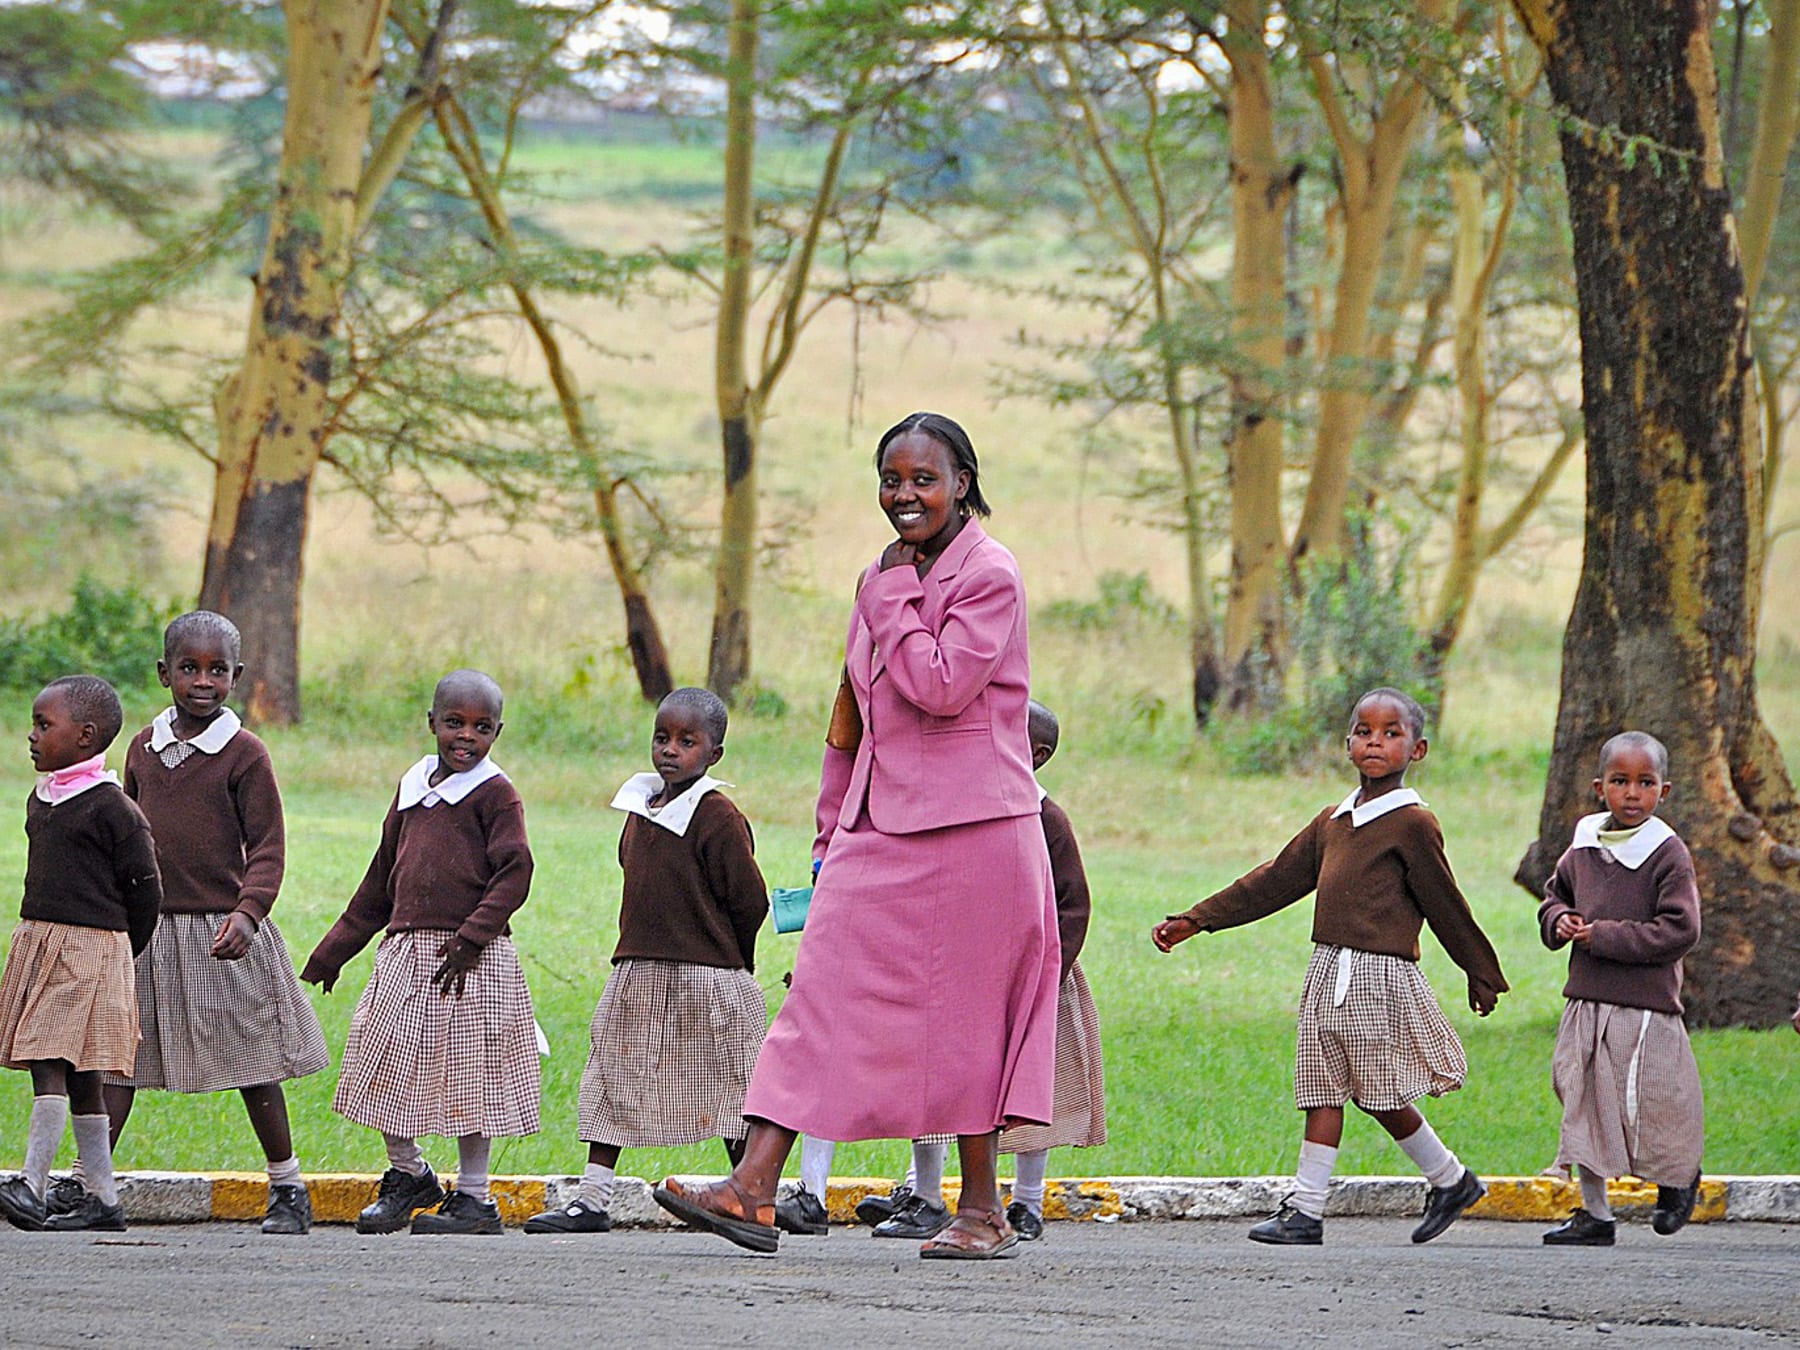 Kenya is one of the fastest growing populations in the world. Image by Nick115, Pixabay.com 